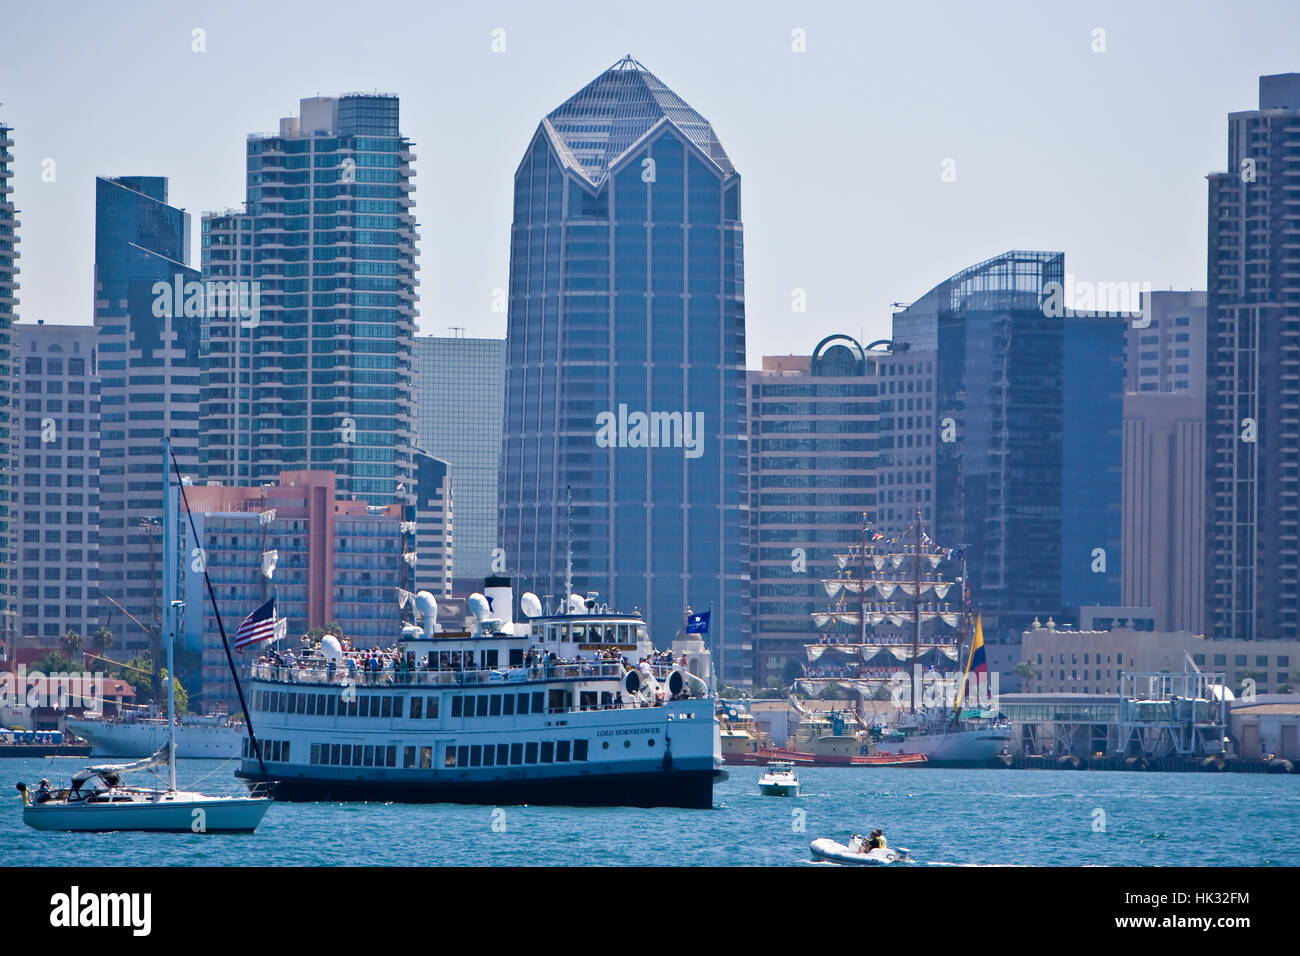 Lord Hornblower is a San Diego Bay tour boat. Stock Photo